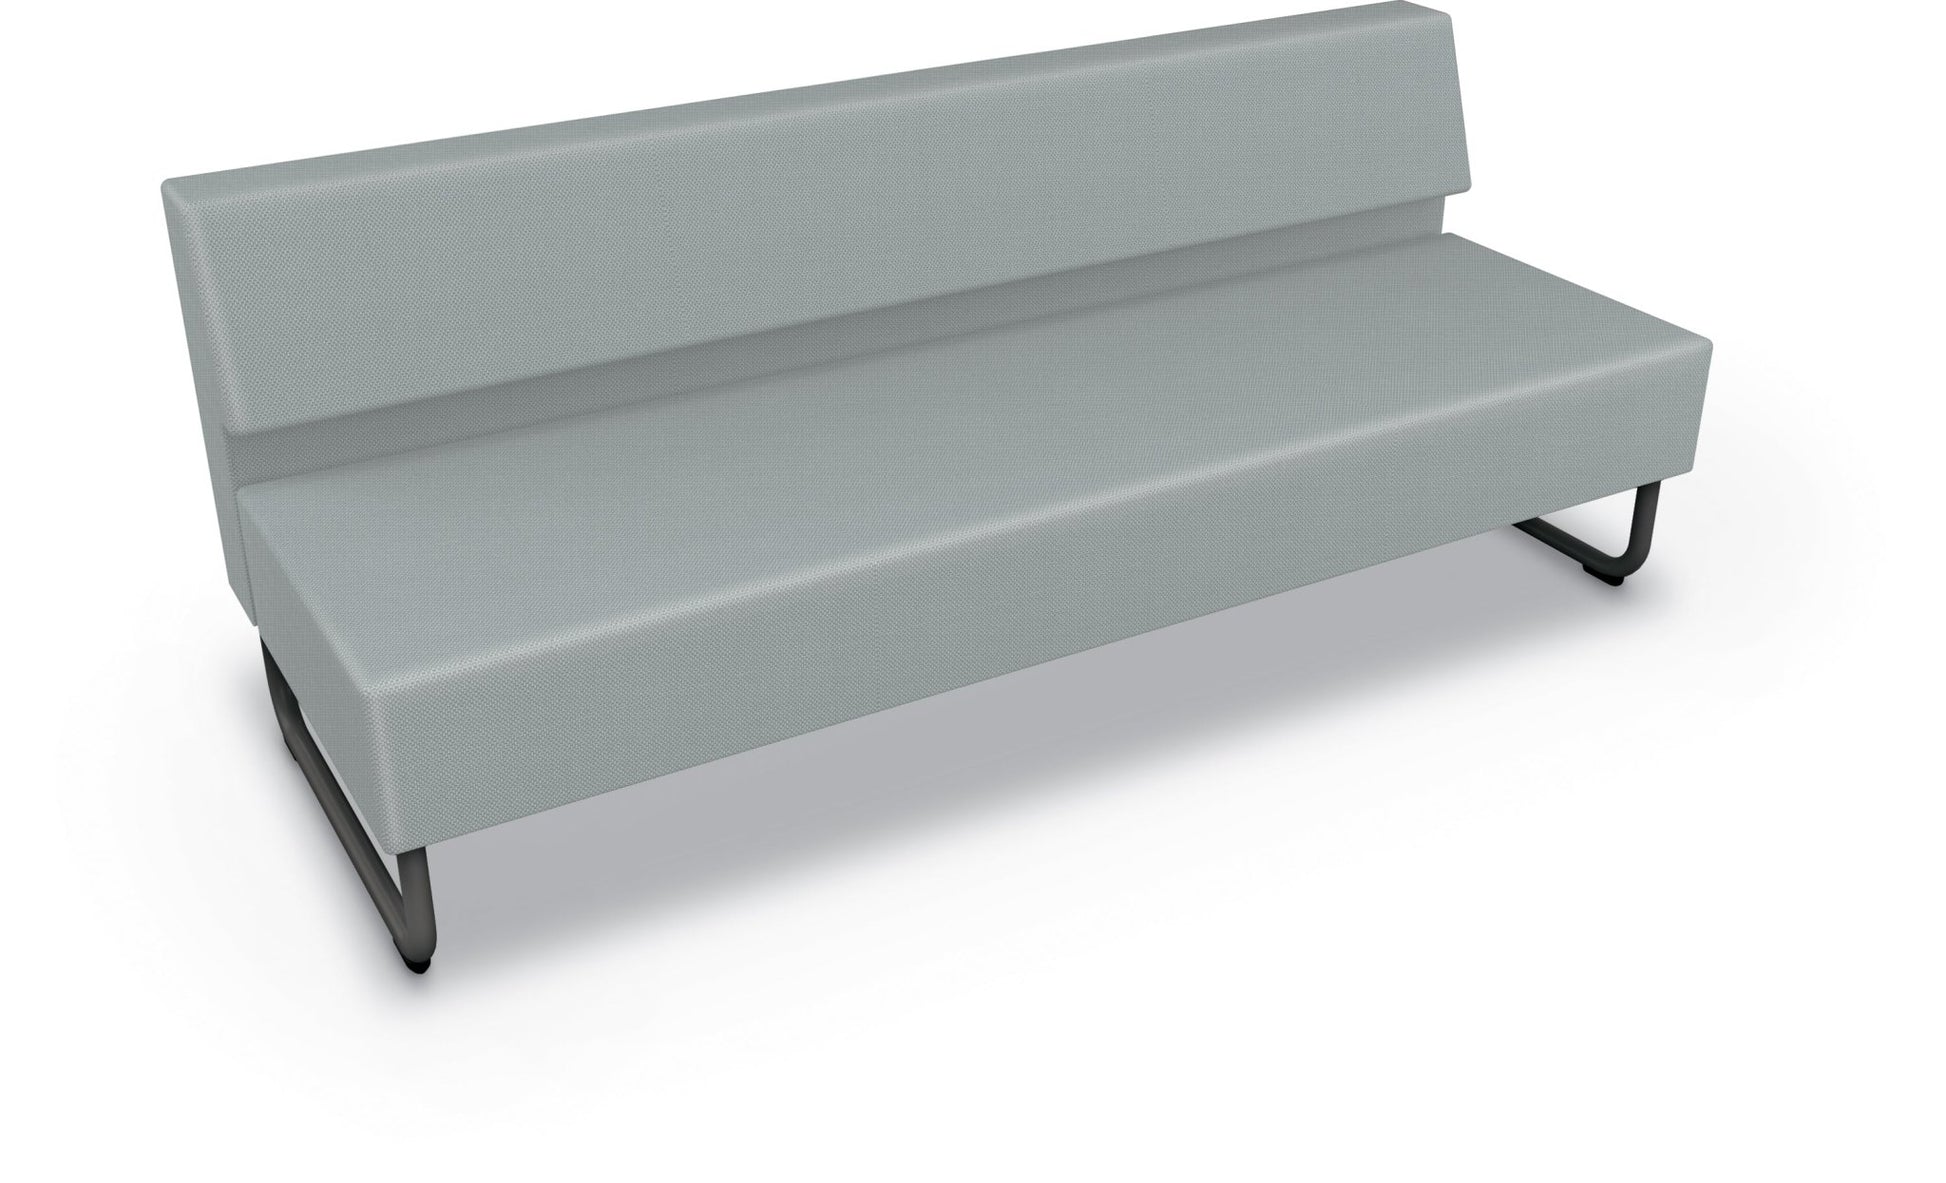 Mooreco Akt Soft Seating Lounge Sofa - Armless - Grade 02 Fabric and Powder Coated Sled Legs - SchoolOutlet